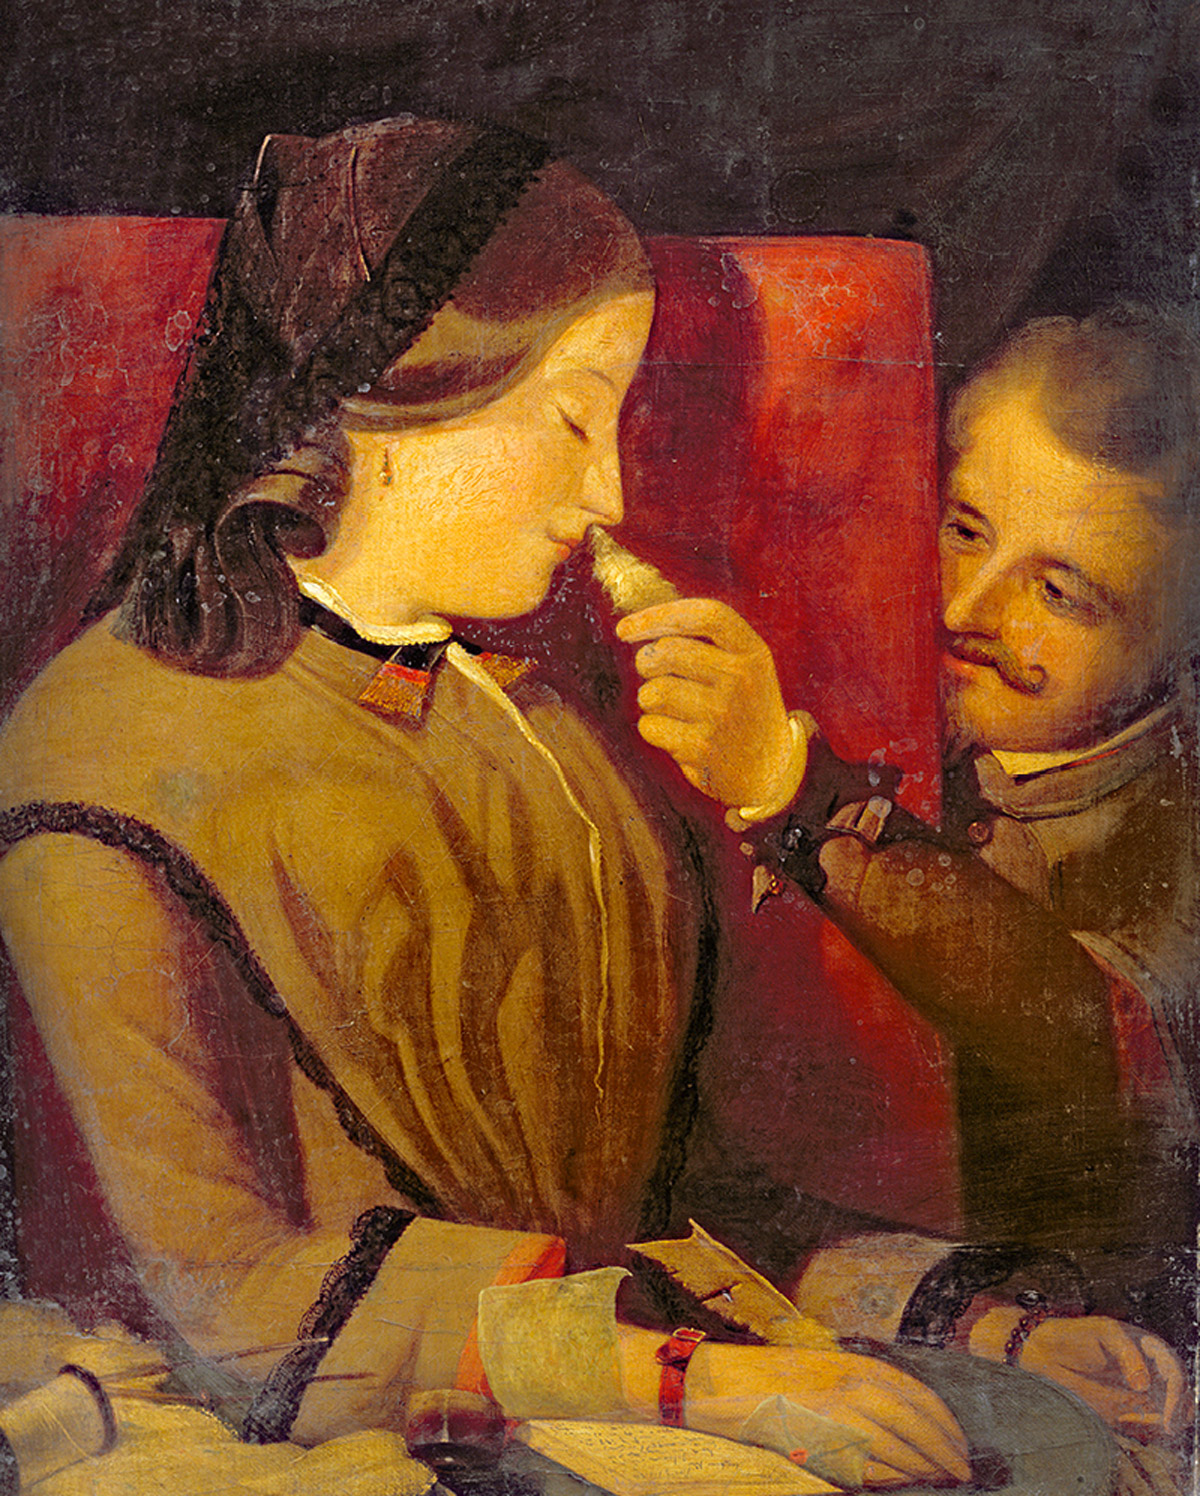 Thomas Wade’s circa eighteen sixty painting titled “Man Tickling a Woman’s Nose with a Feather.”